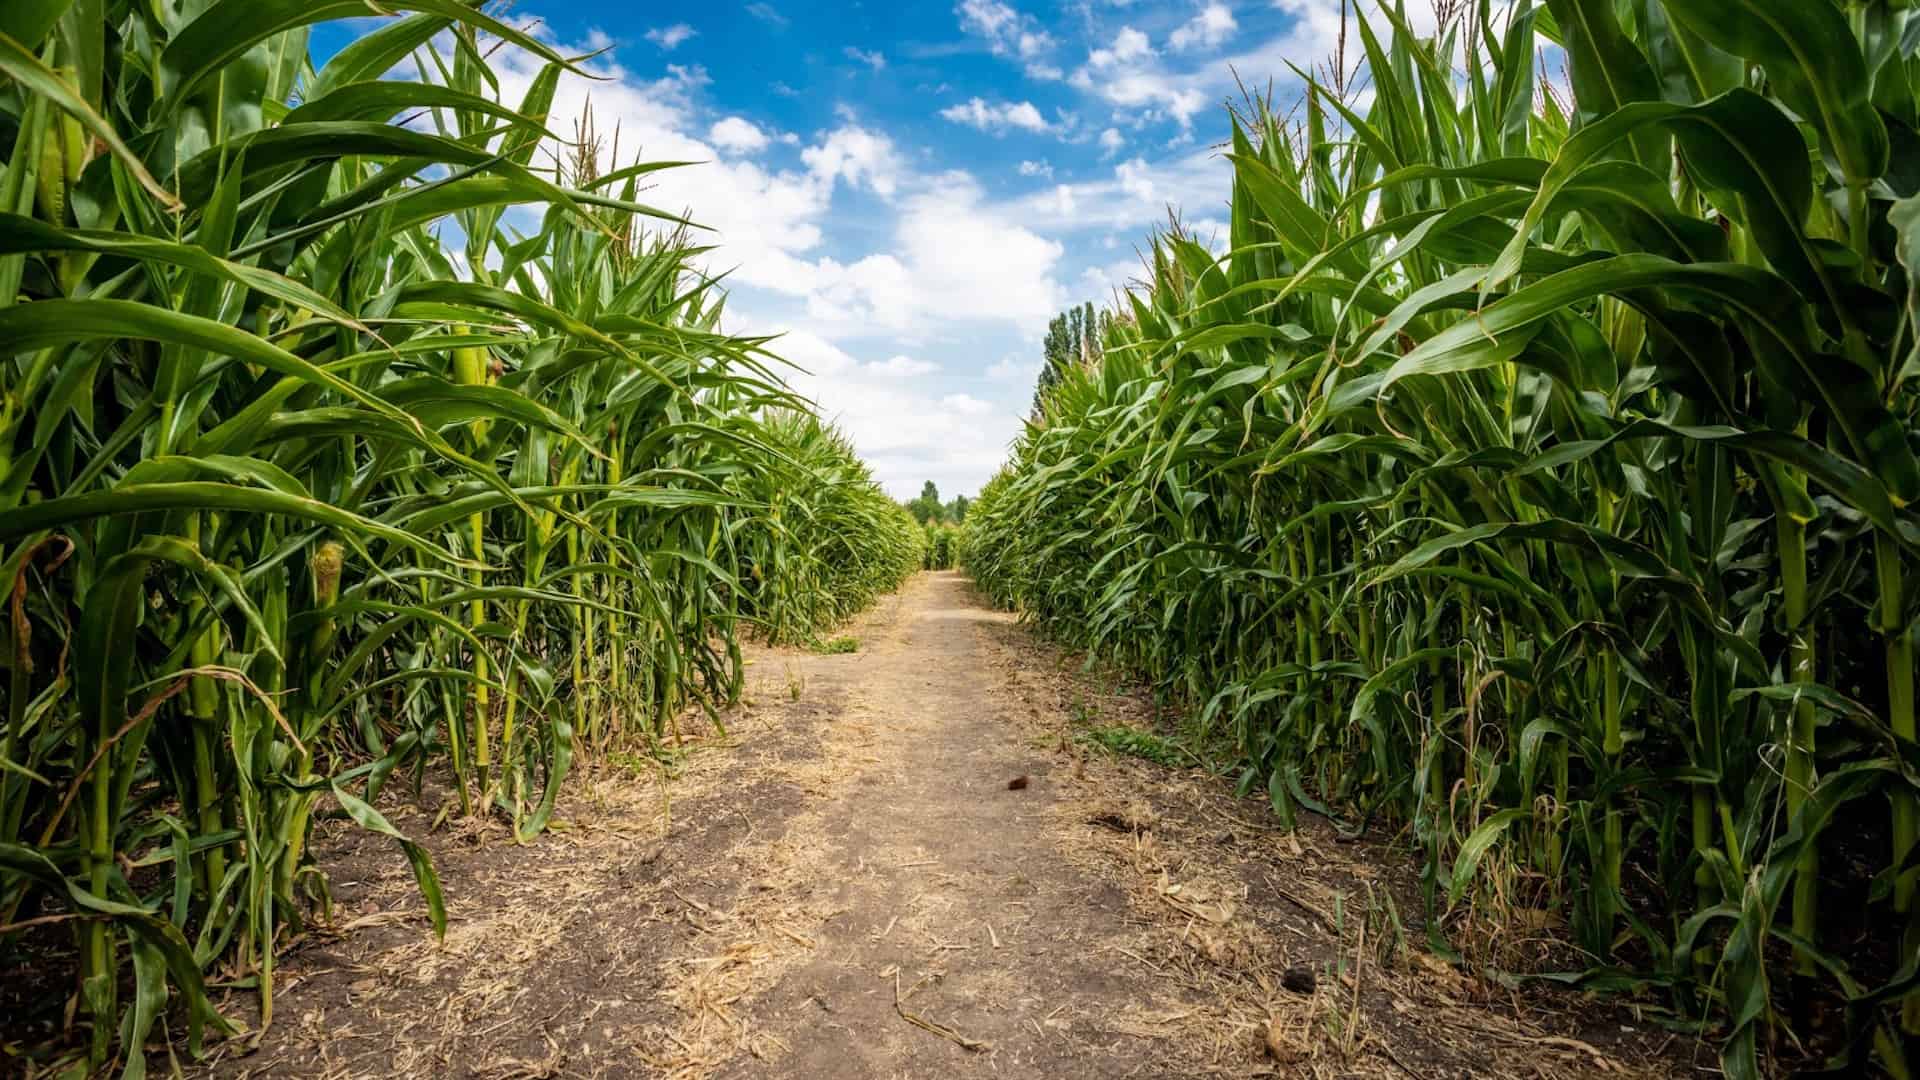 Corky's Corn Maze debuts in Plant City - That's So Tampa